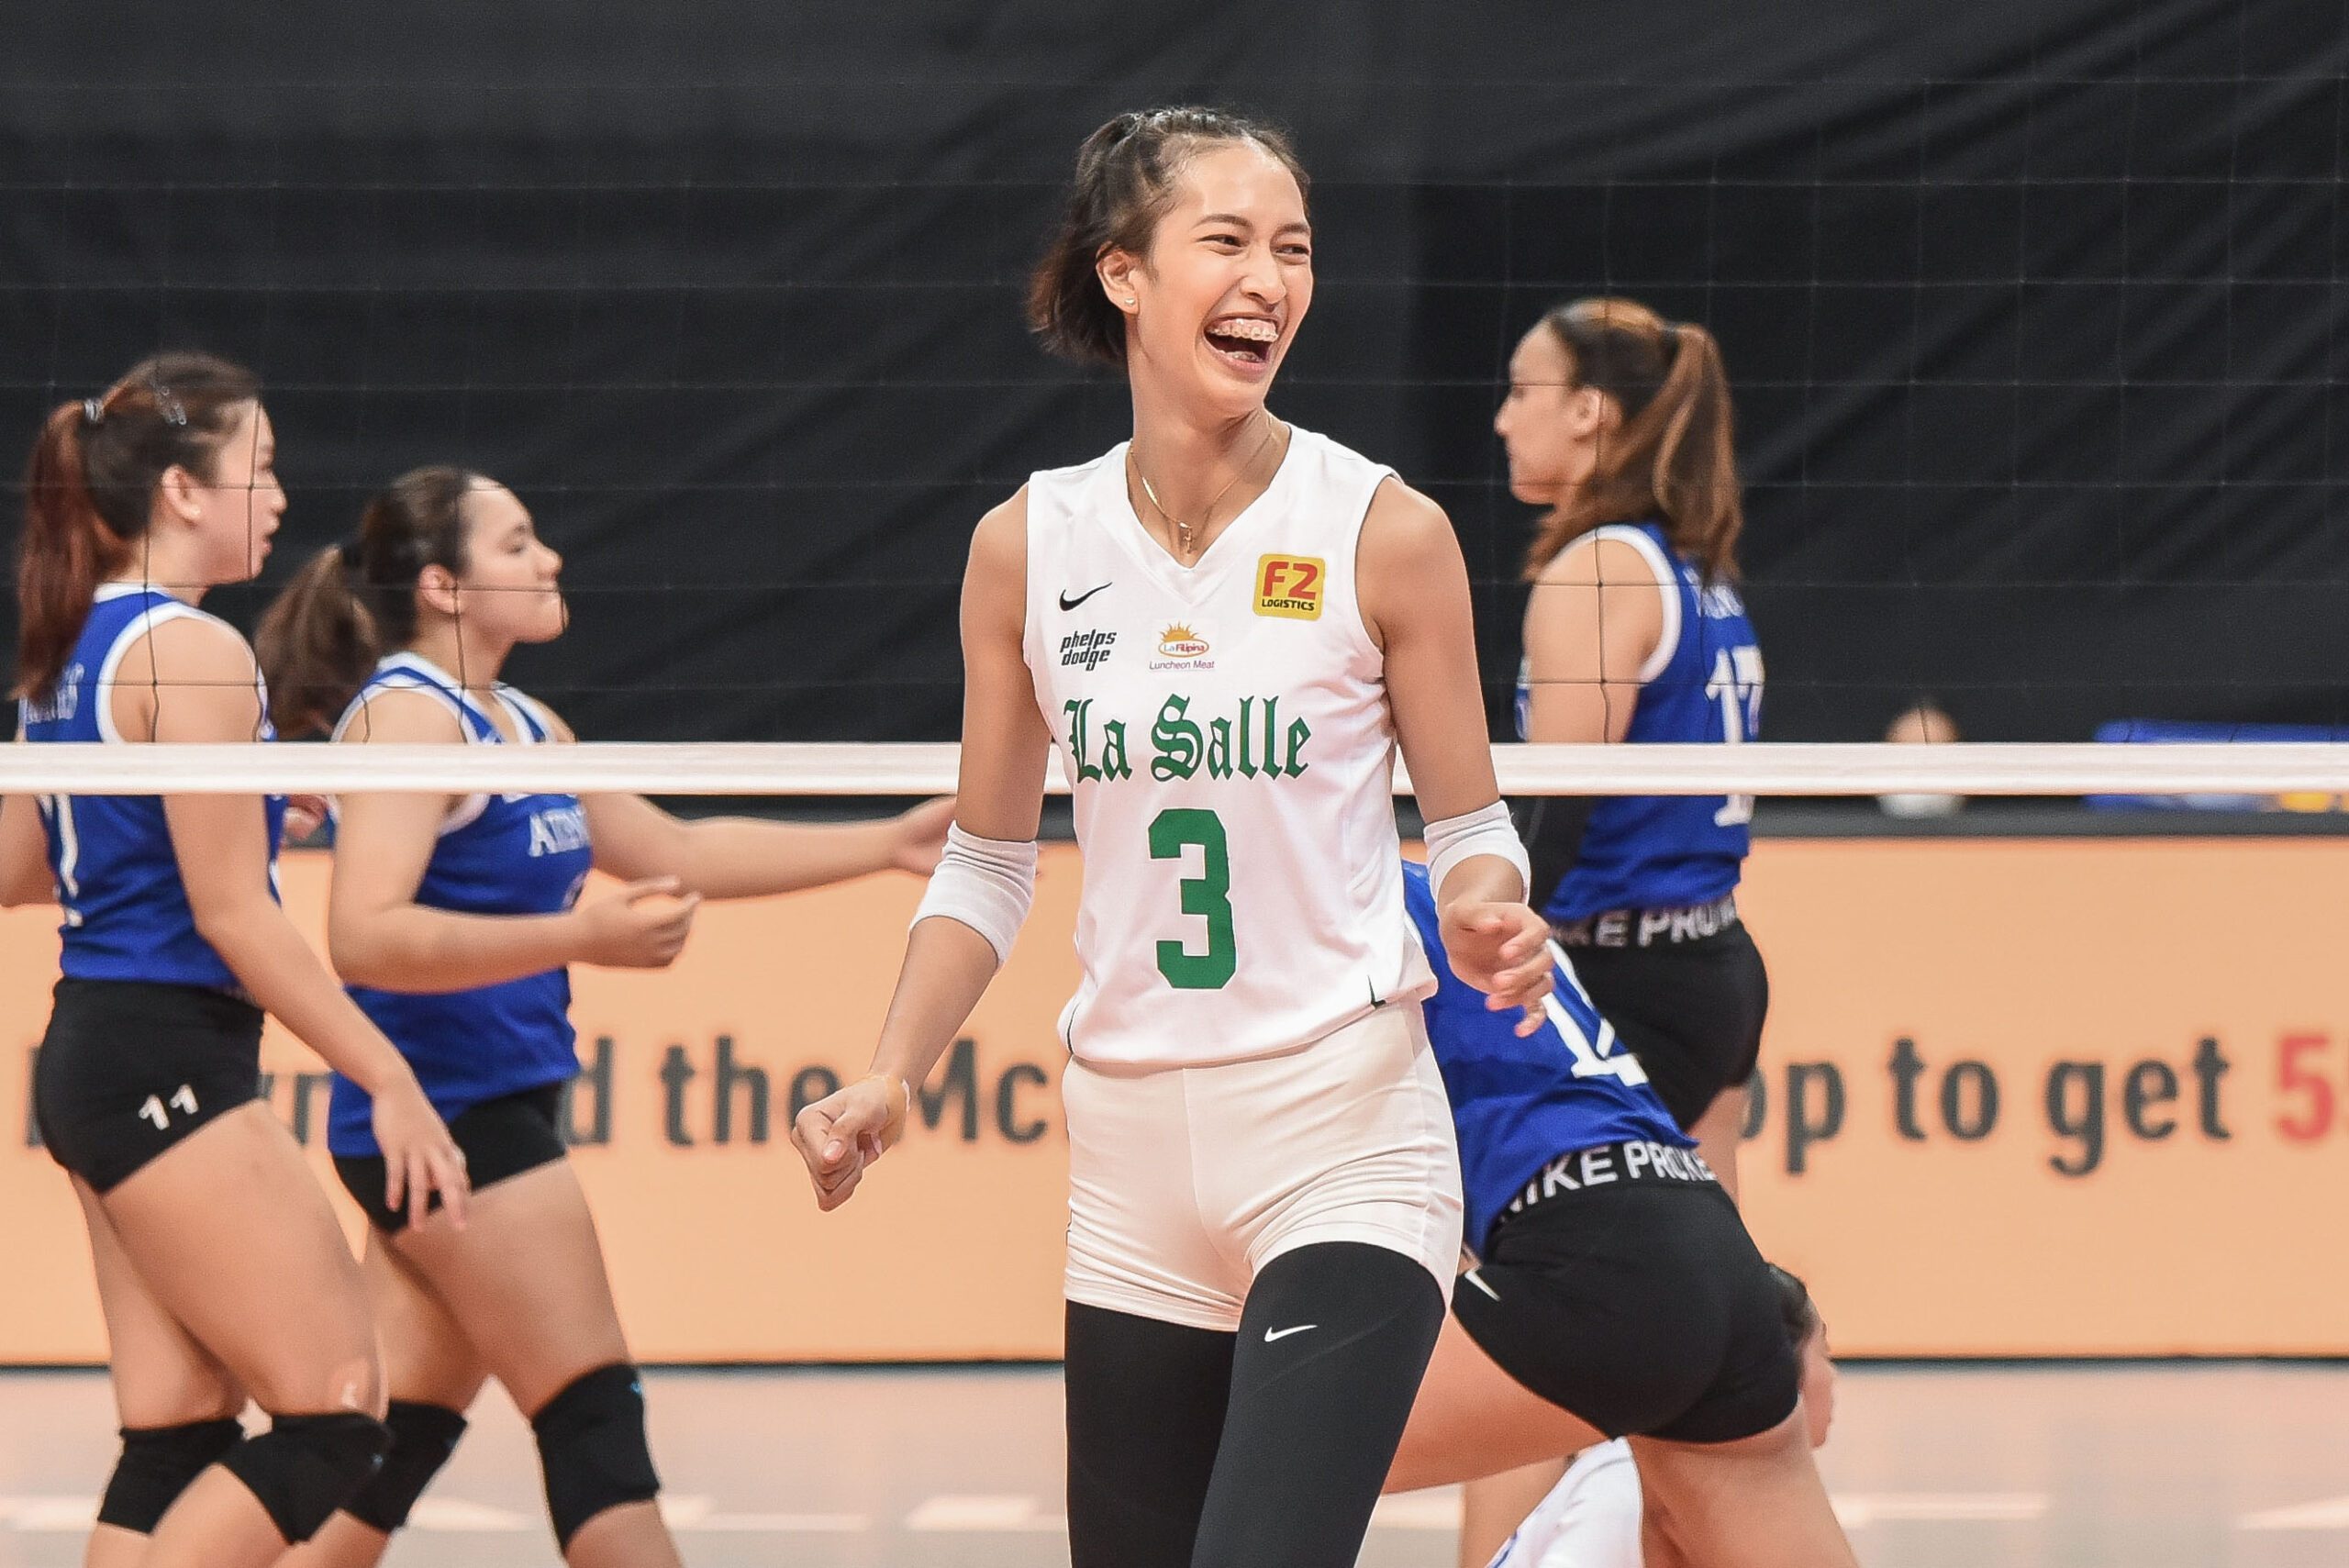 La Salle ends Ateneo fairy tale stepladder run, sets up finals series against NU